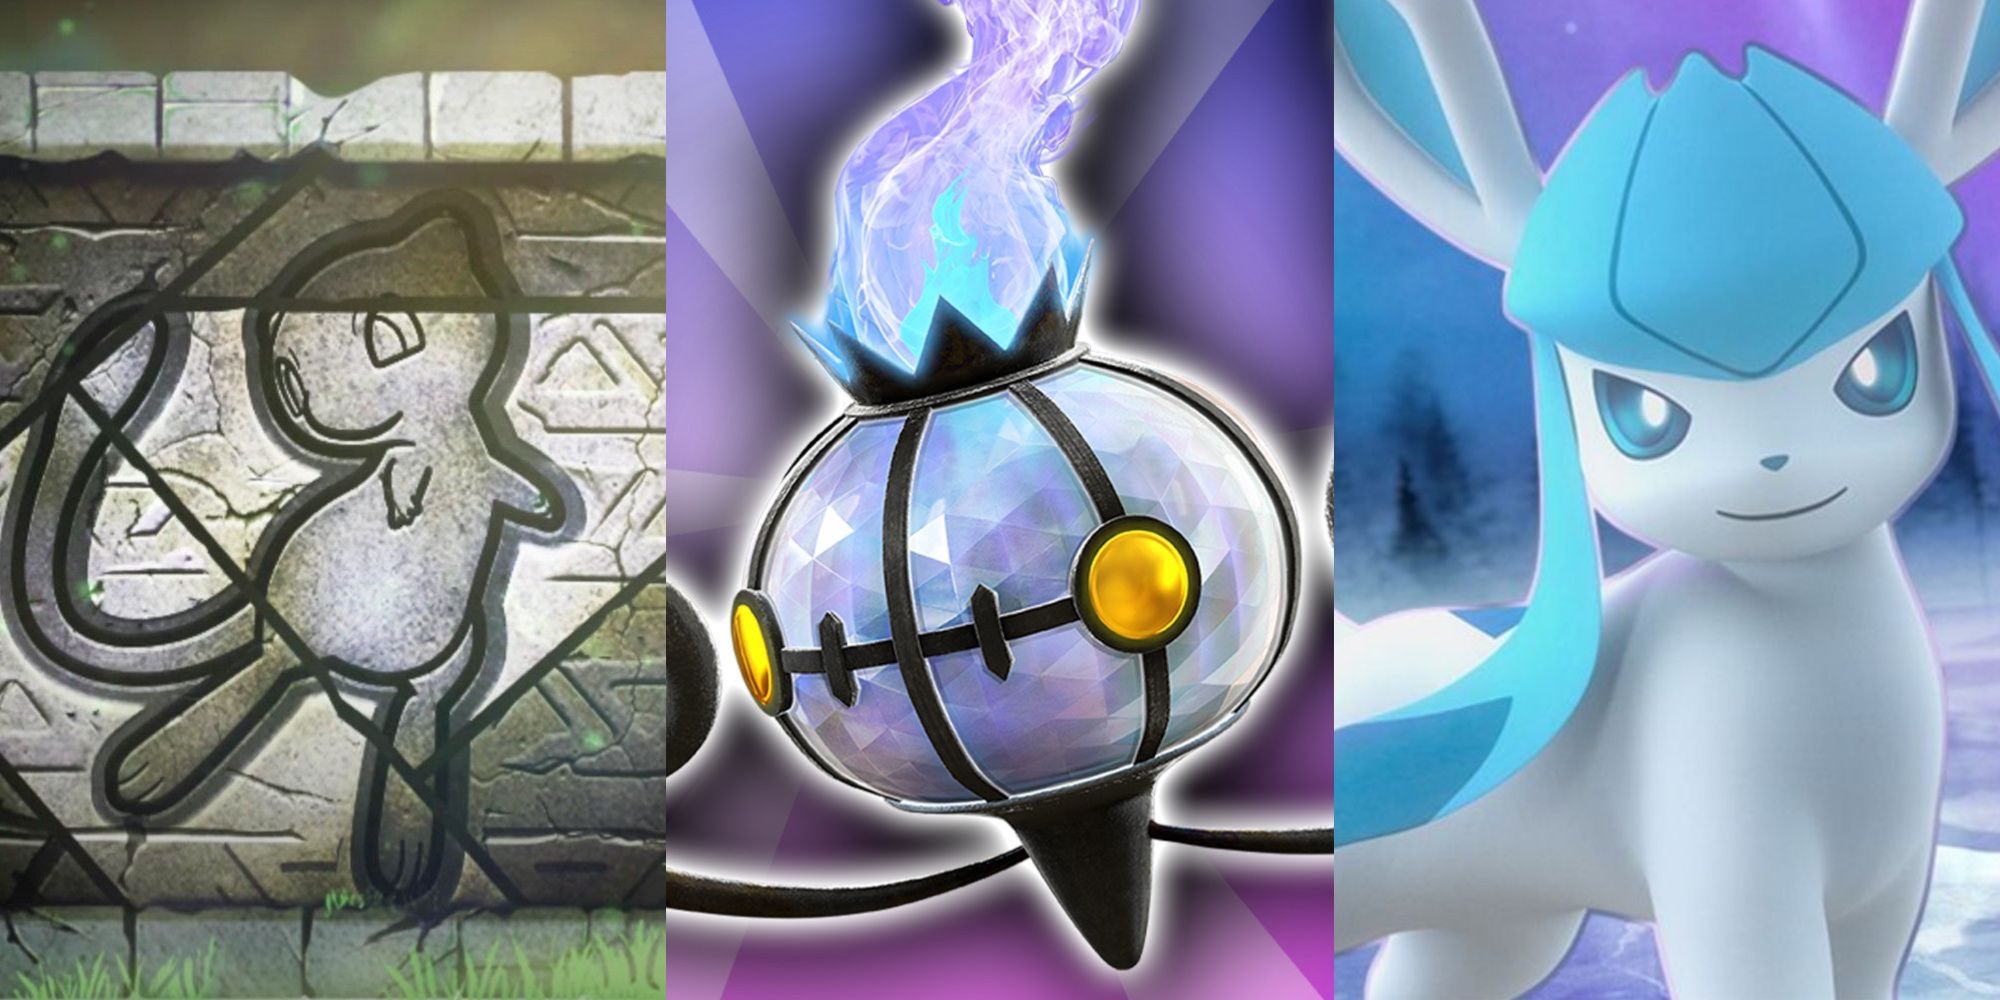 A split image of Mew on a rock wall, Chandelure floating, and Glaceon with ice behind it in Pokemon Unite.